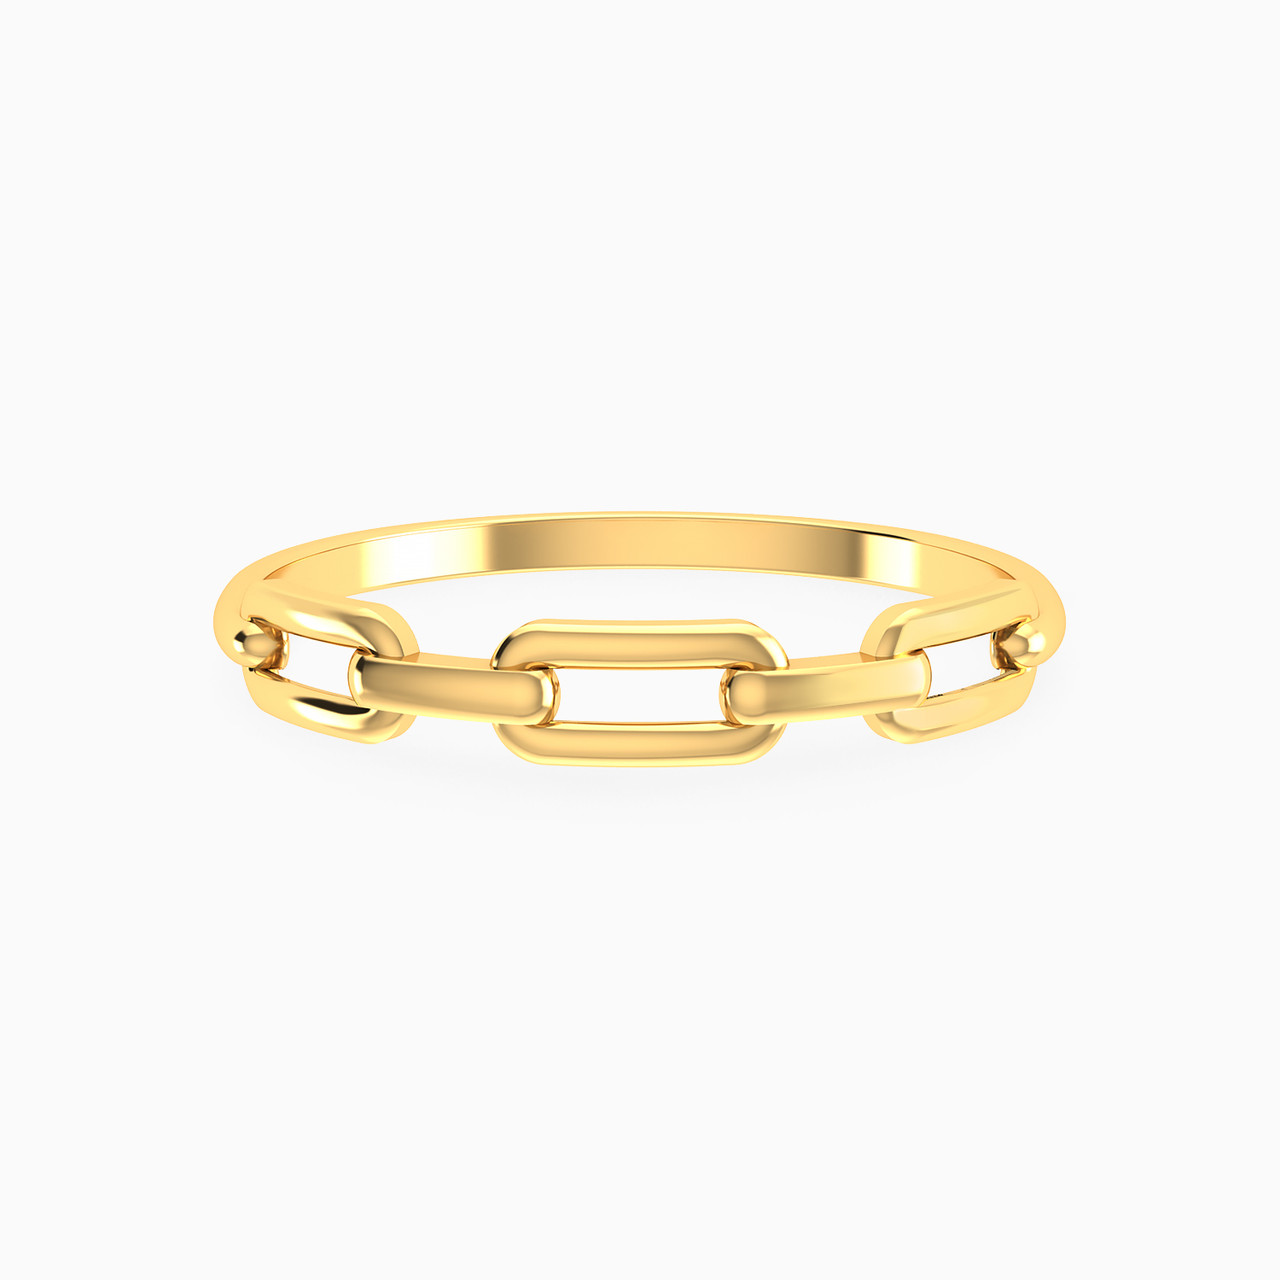 Chain Shaped Statement Ring in 14K Gold